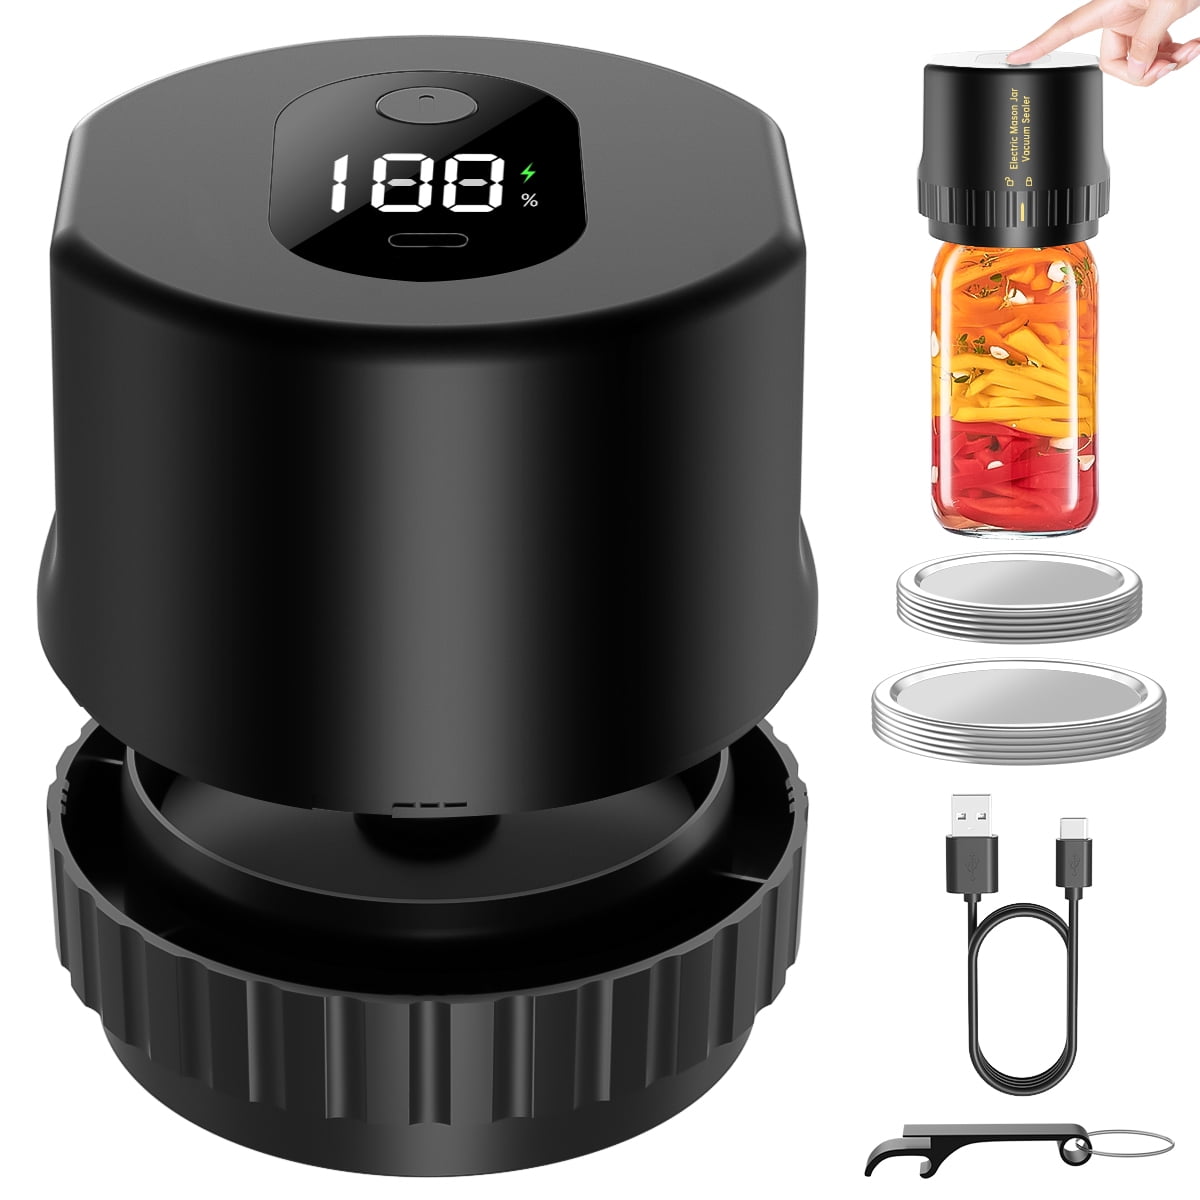 Electric Jar Opener, Kitchen Battery Operated Automatic Jar Openers Prime  for Seniors with Arthritis/Weak Hands from LIFETWO 